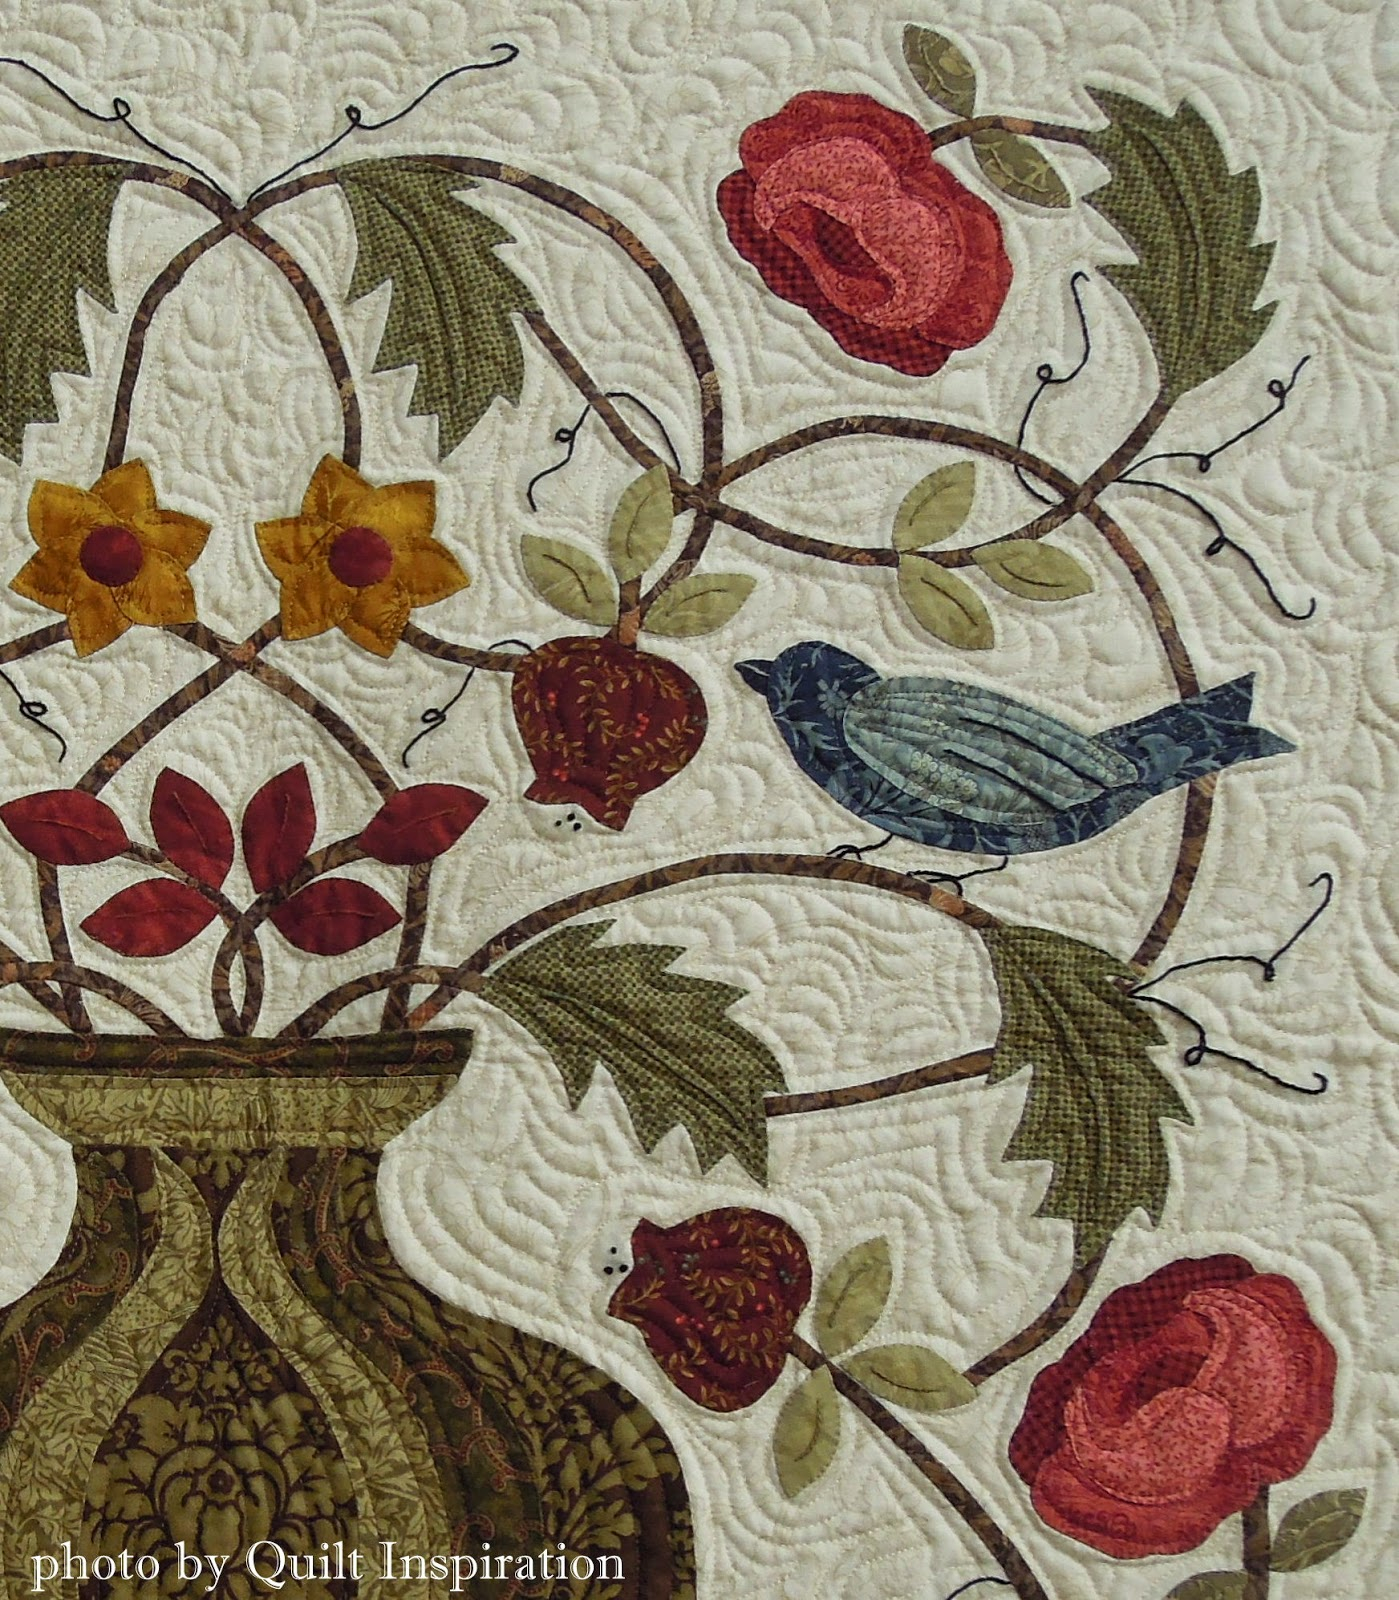 William Morris Embroidery Patterns Quilt Inspiration William Morris For Applique Lovers